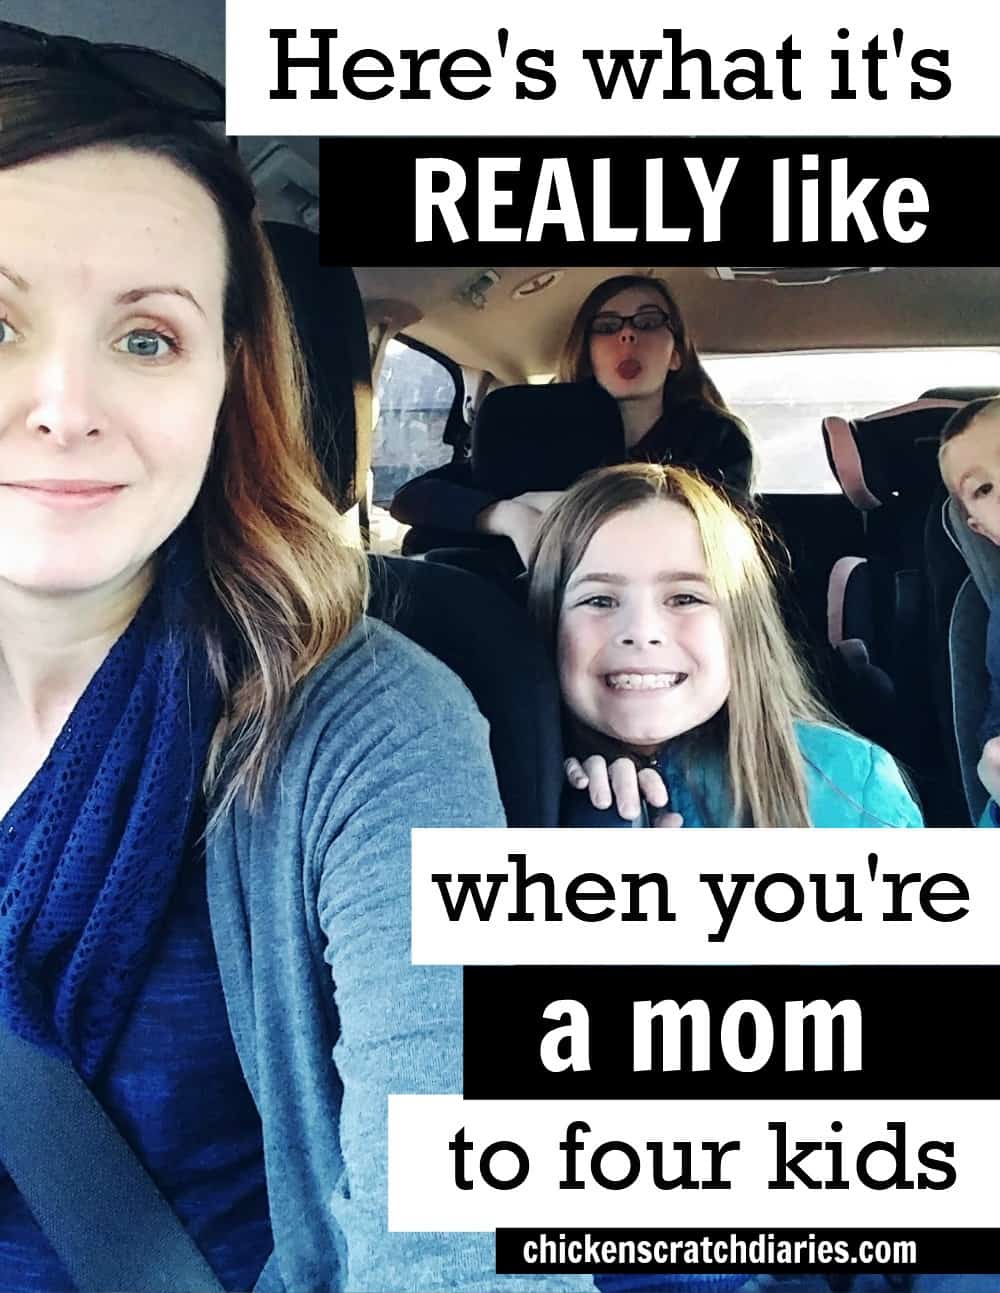 Four Kids: the truth, the humor and the joy that accompanies big-family life. #Family #Motherhood #FourKids #MomHumor #Parenting